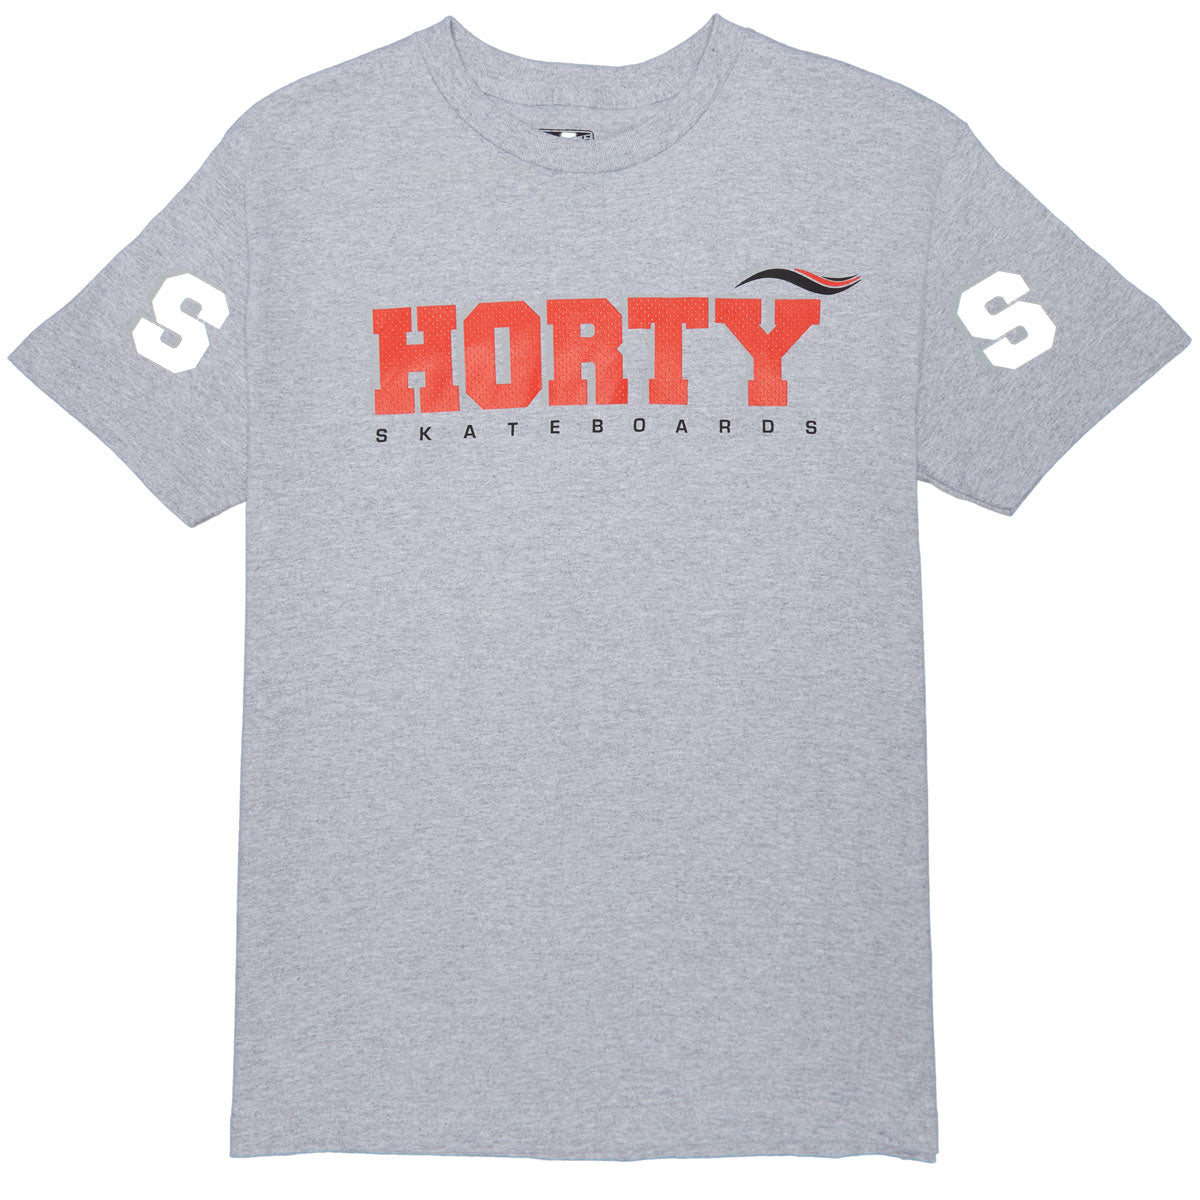 Shorty's S-horty-S Mesh T-Shirt - Athletic Grey image 1